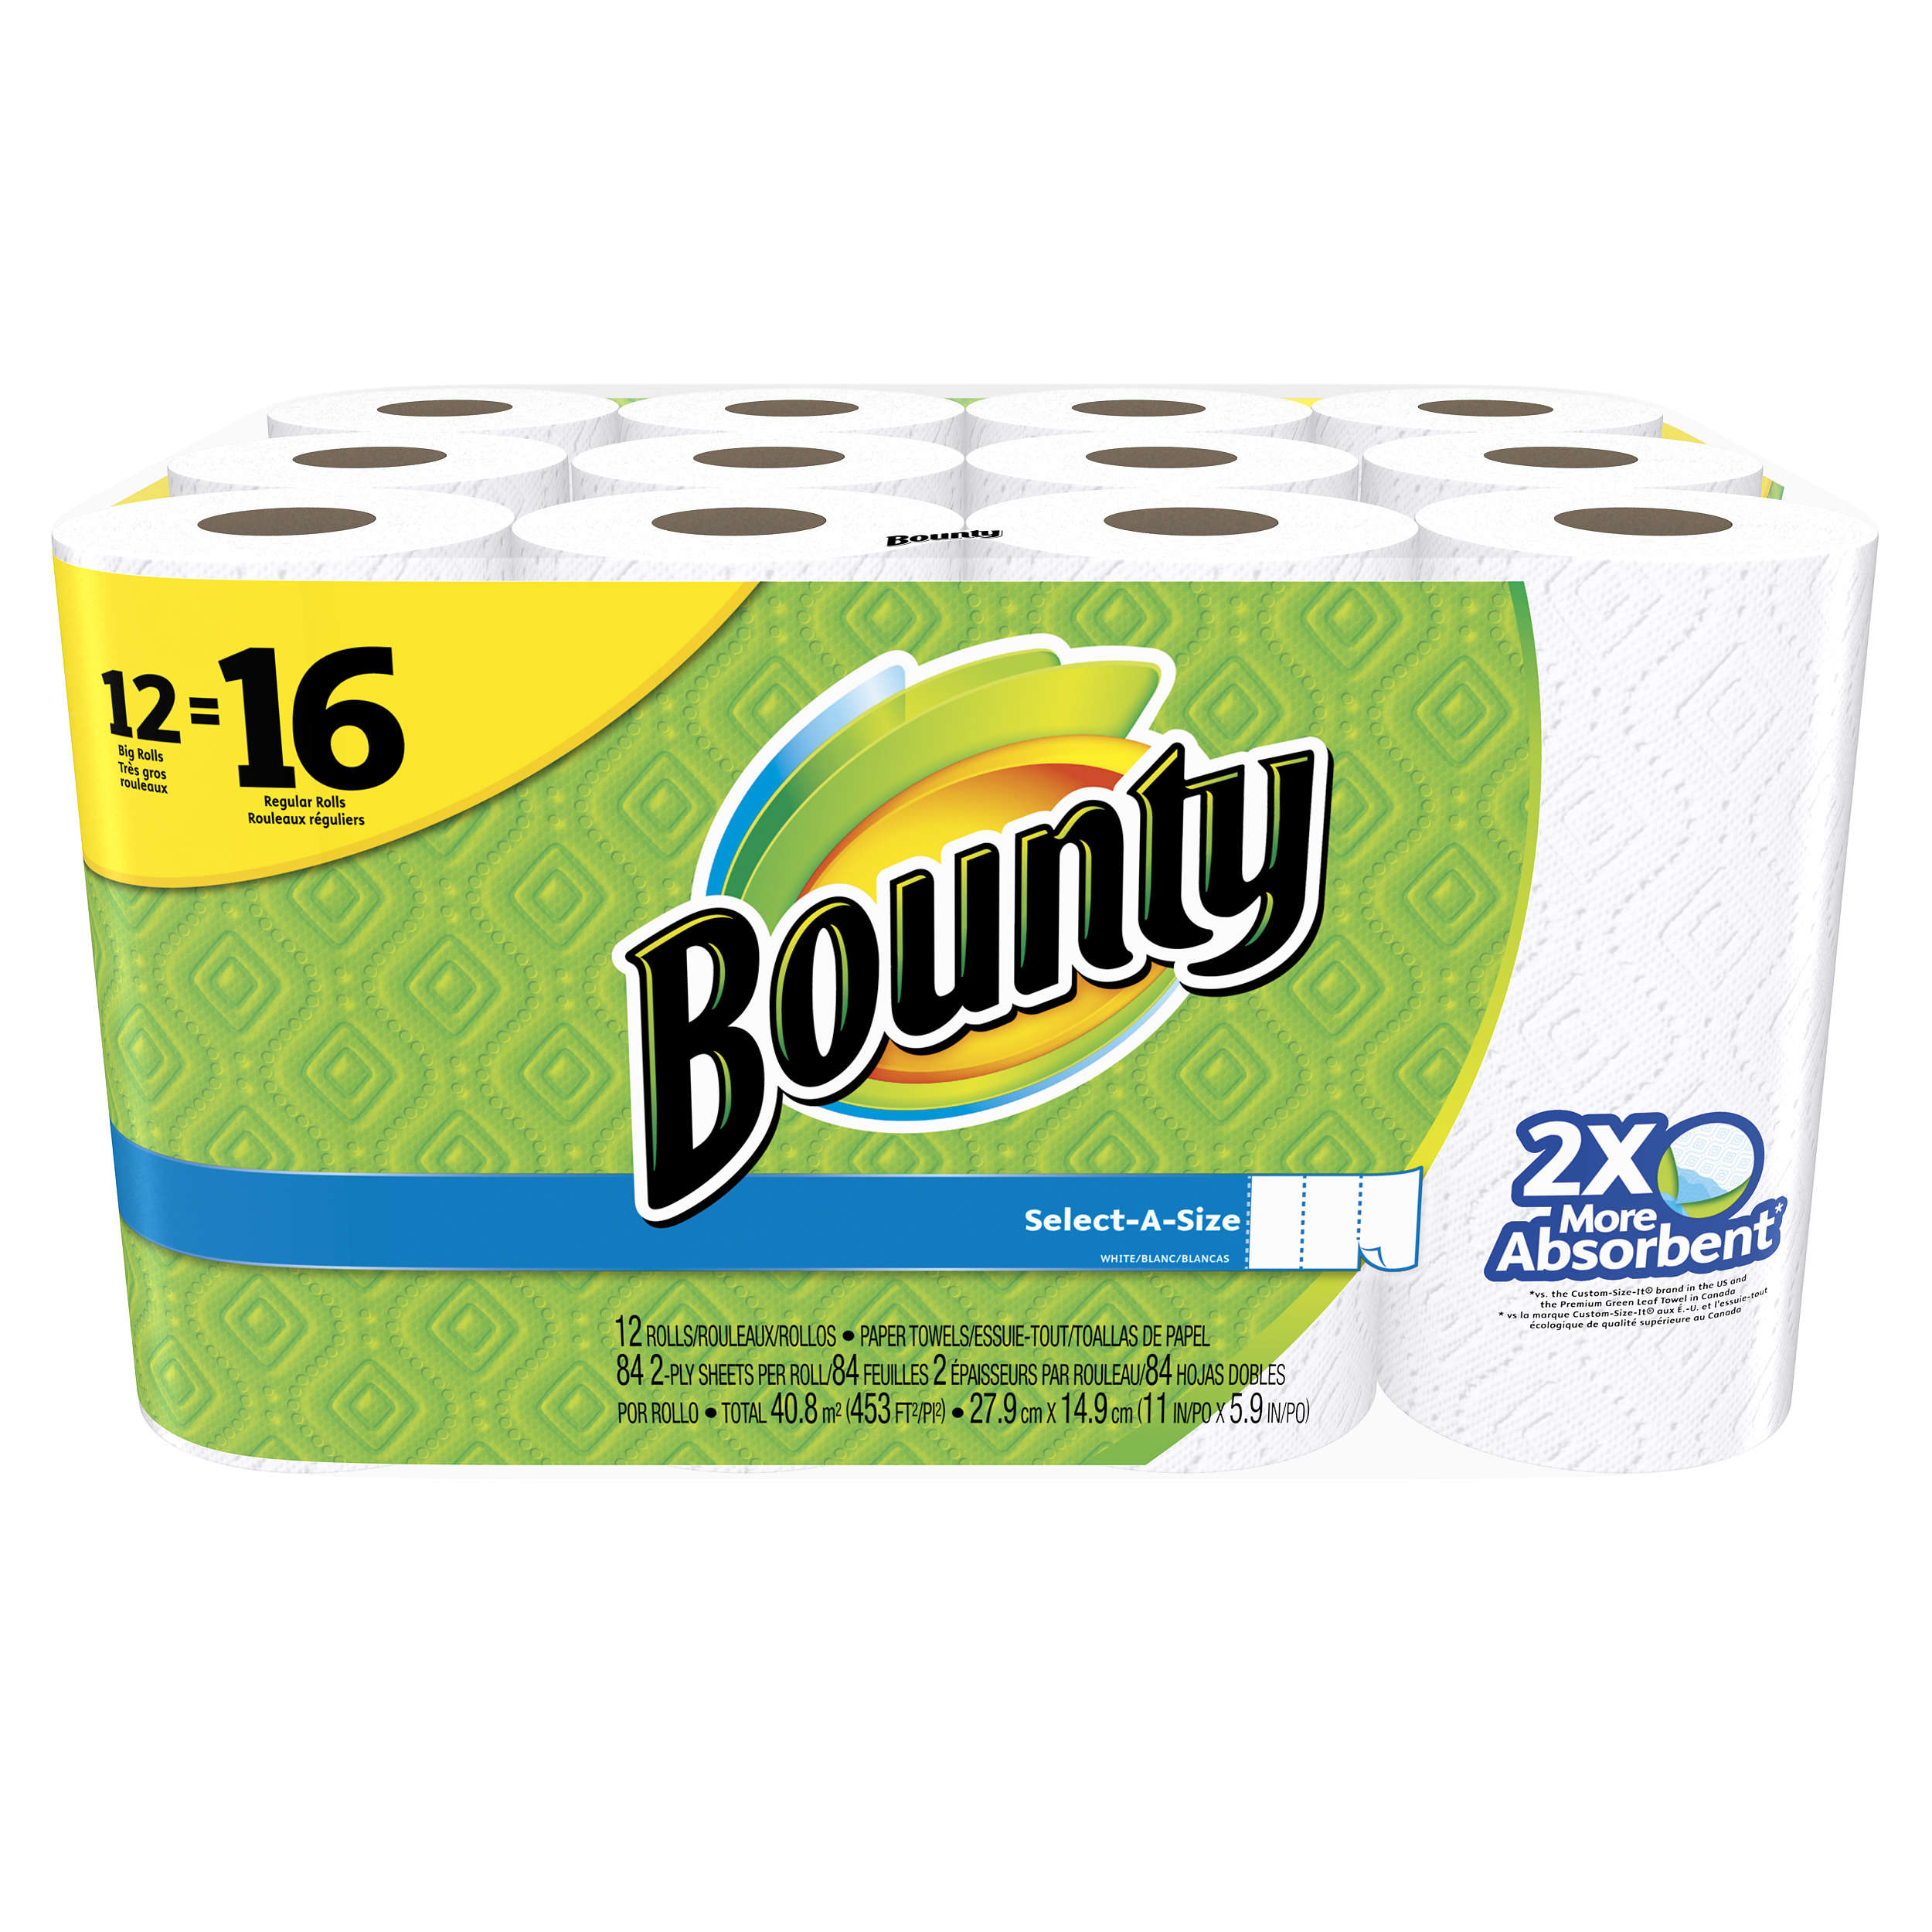 Bounty Select-a-Size Big Roll Paper Towels, 84 sheets, 12 rolls - image 1 of 9